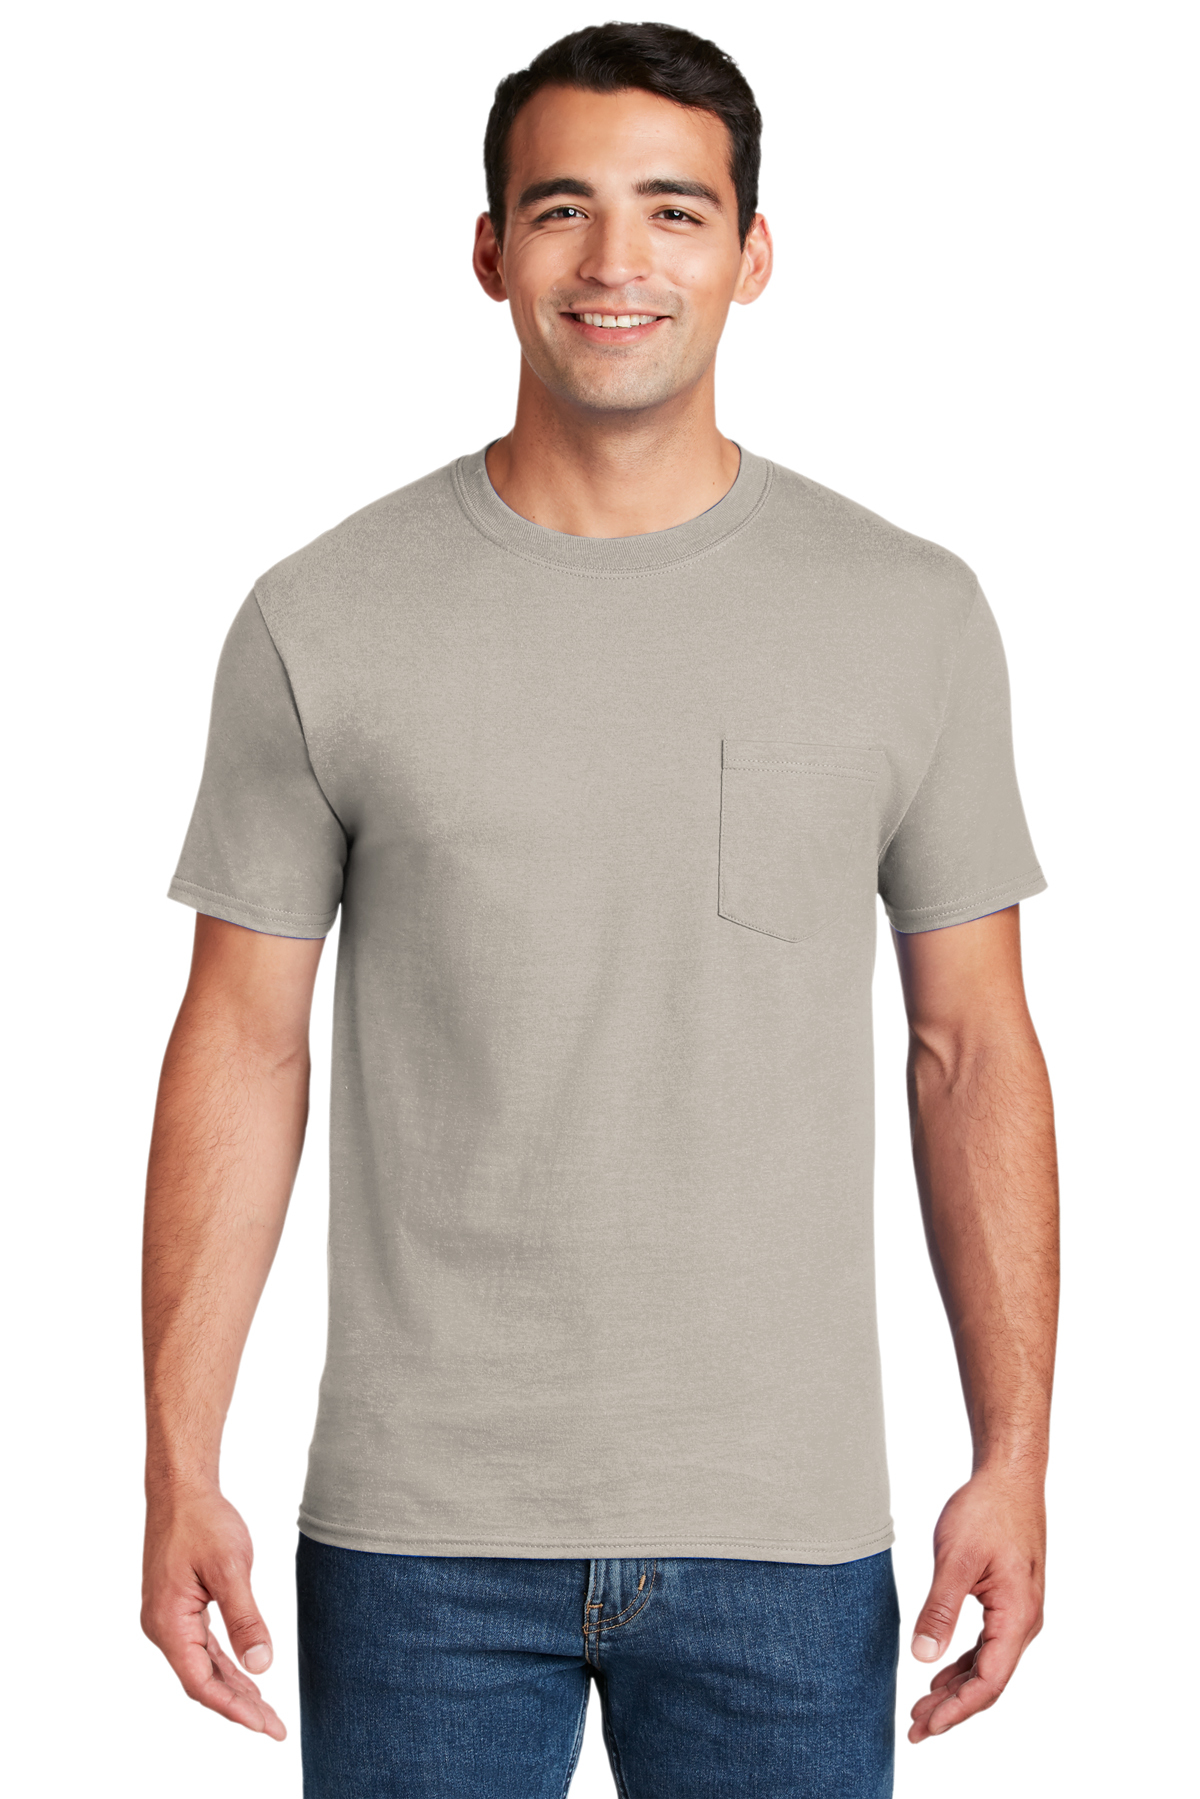 Hanes Beefy-T - 100% Cotton T-Shirt with Pocket, Product